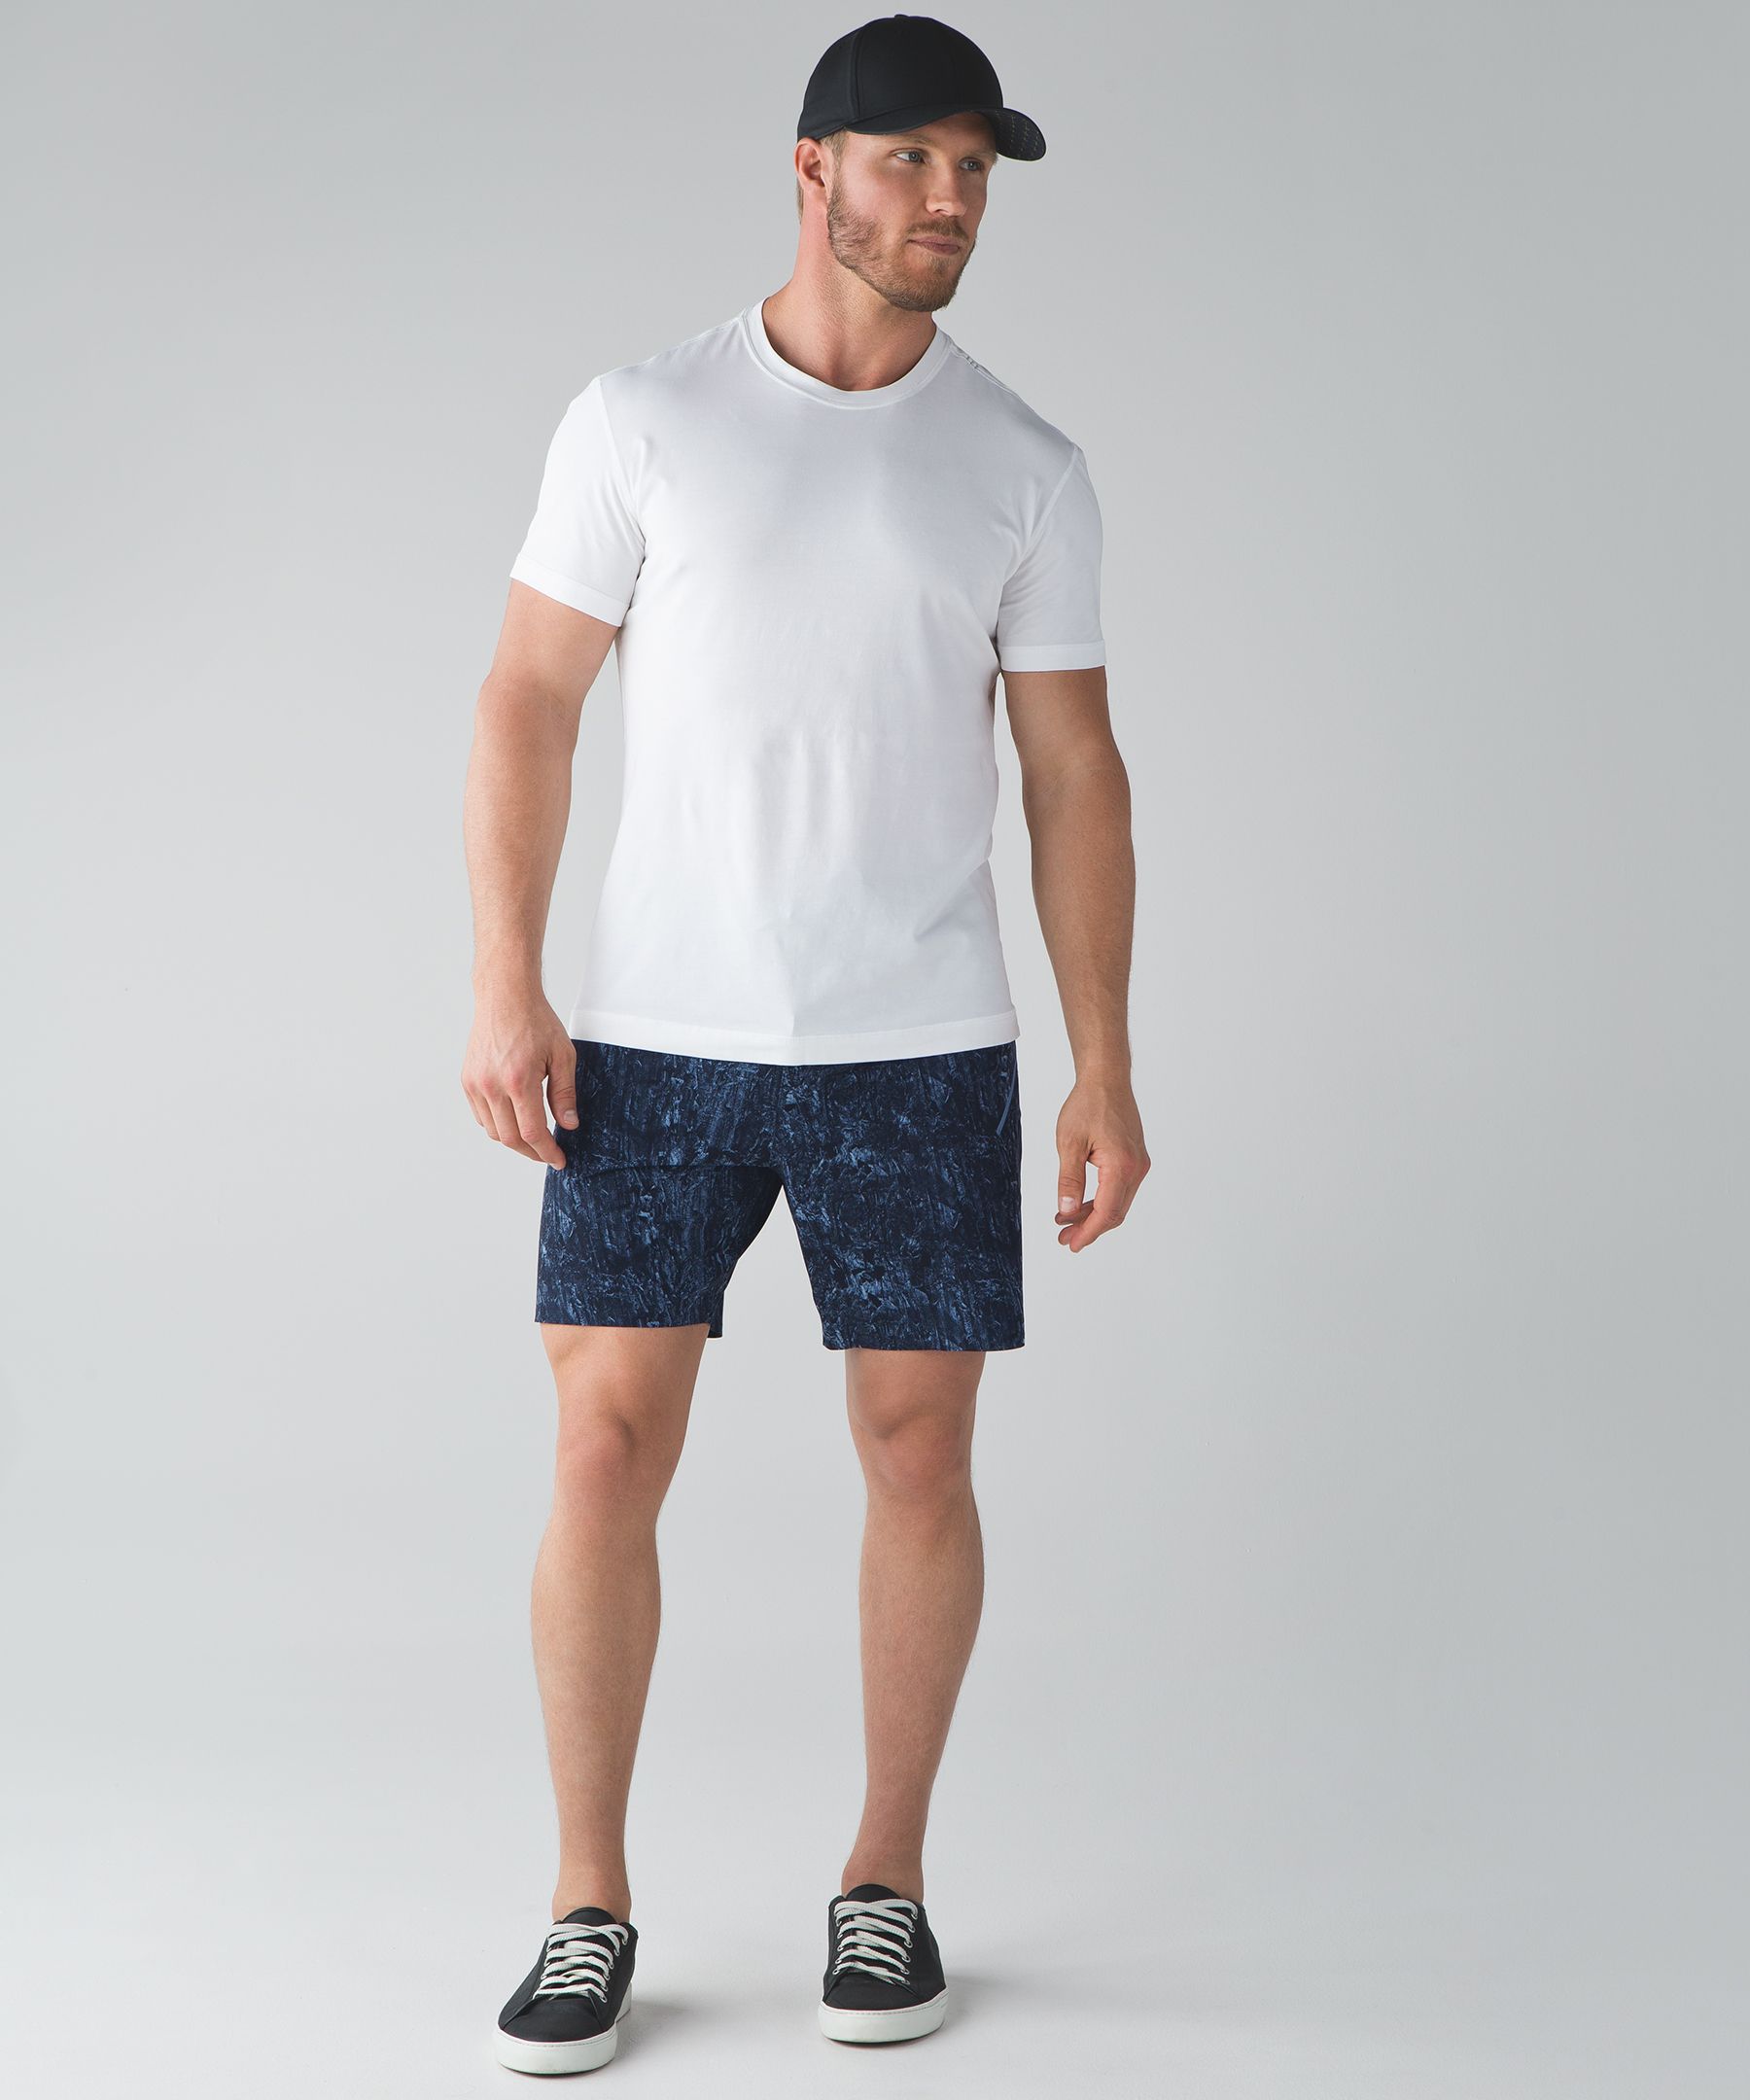 what to wear with lulu shorts men